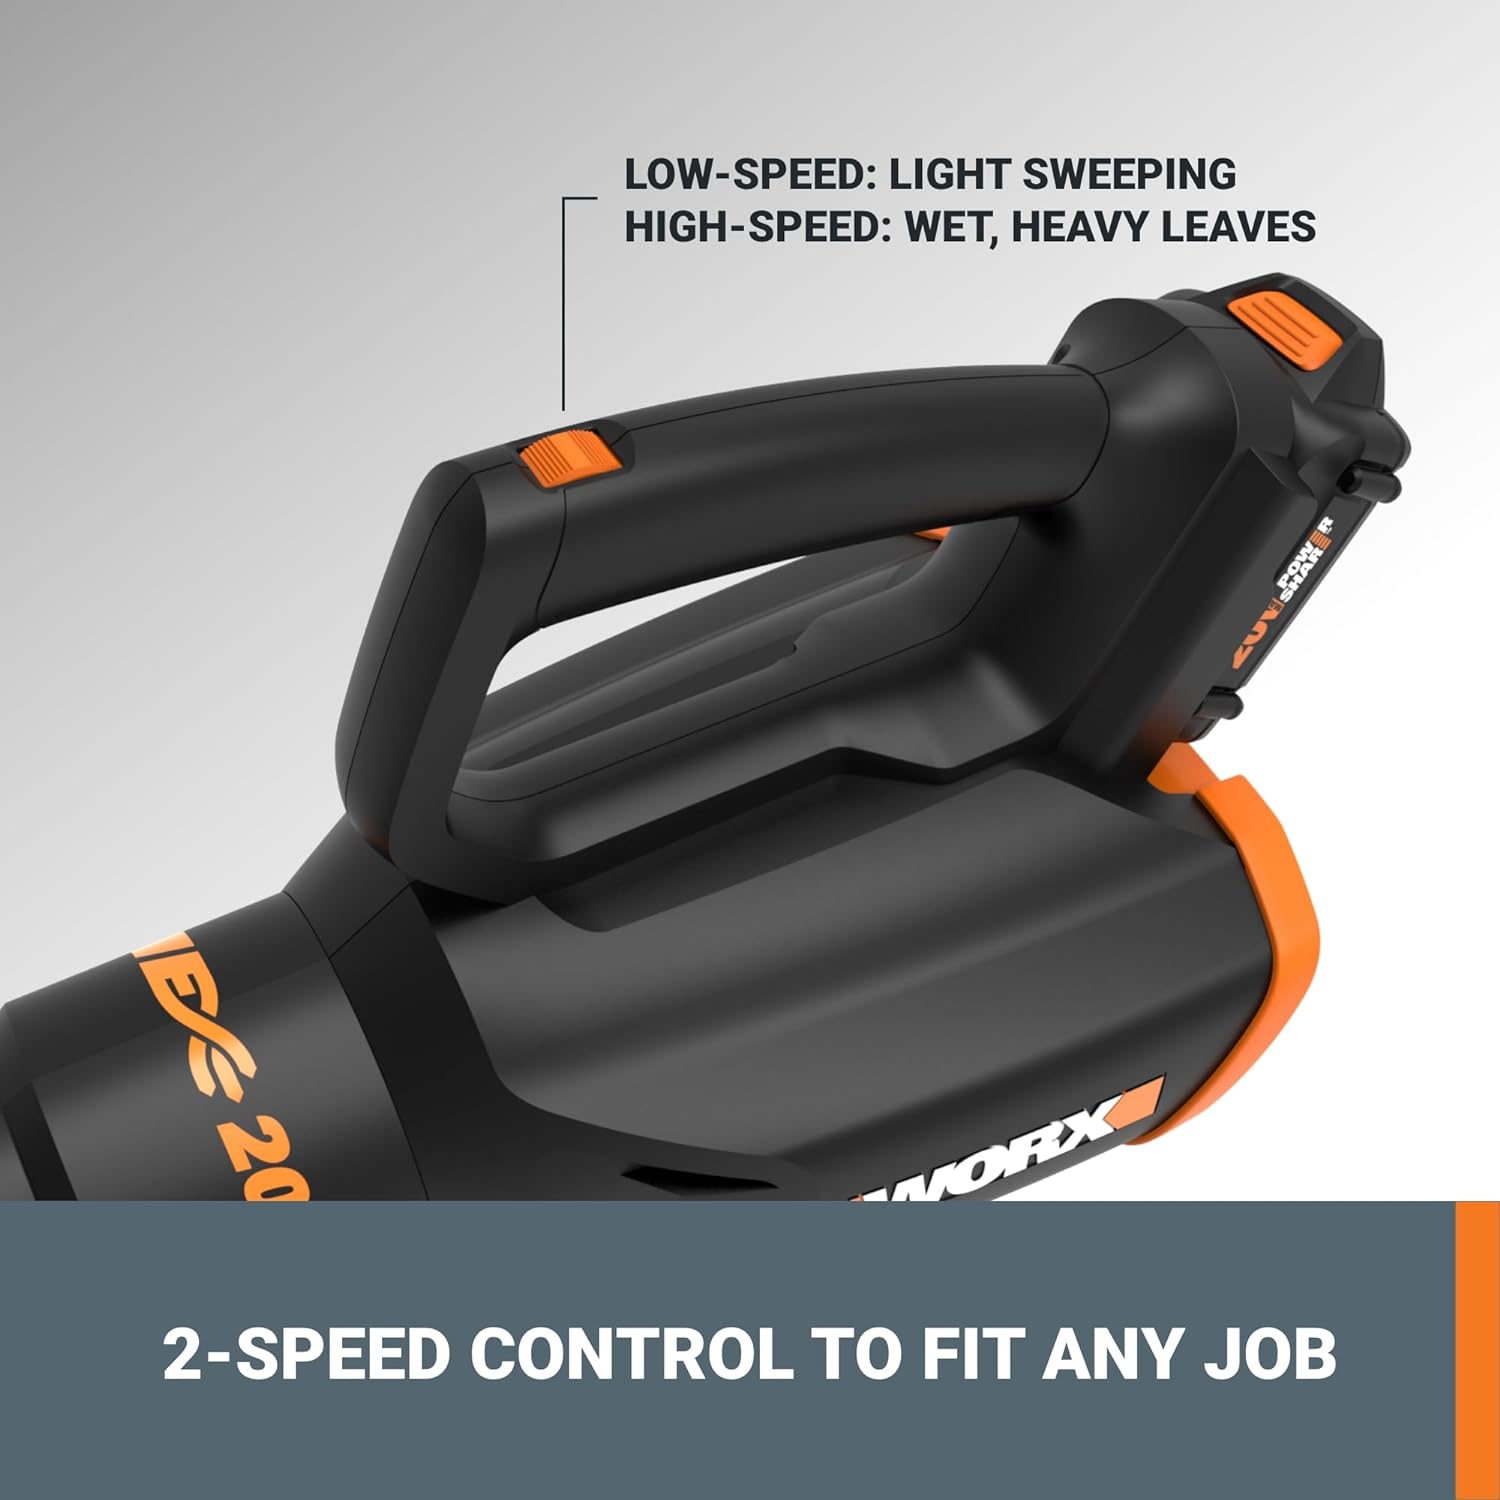 https://bigbigmart.com/wp-content/uploads/2023/10/Worx-20V-2-Speed-Leaf-Blower-Cordless-with-Battery-and-Charger-Blowers-for-Lawn-Care-with-Turbine-Fan-Compact-Lightweight-Cordless-Leaf-Blower-WG547-%E2%80%93-Battery-Charger-Included3.jpg